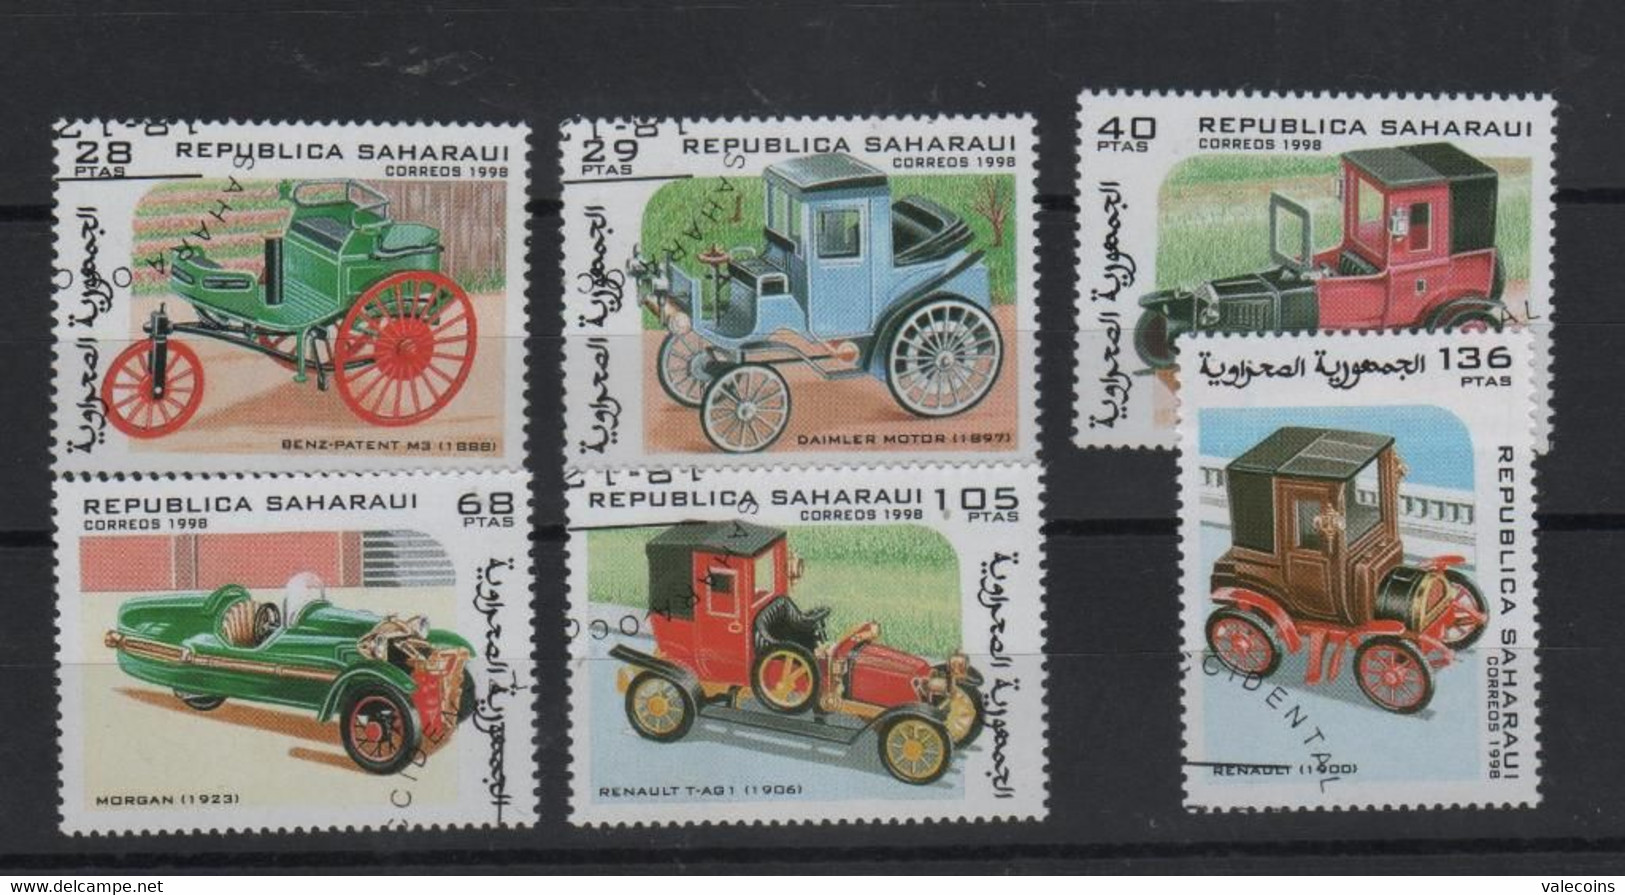 # SAHARAWI SAHARAUI - 1997 - Fiat Renault Oldsmobile Old Cars 6 Cancelled Stamps - Africa (Varia)